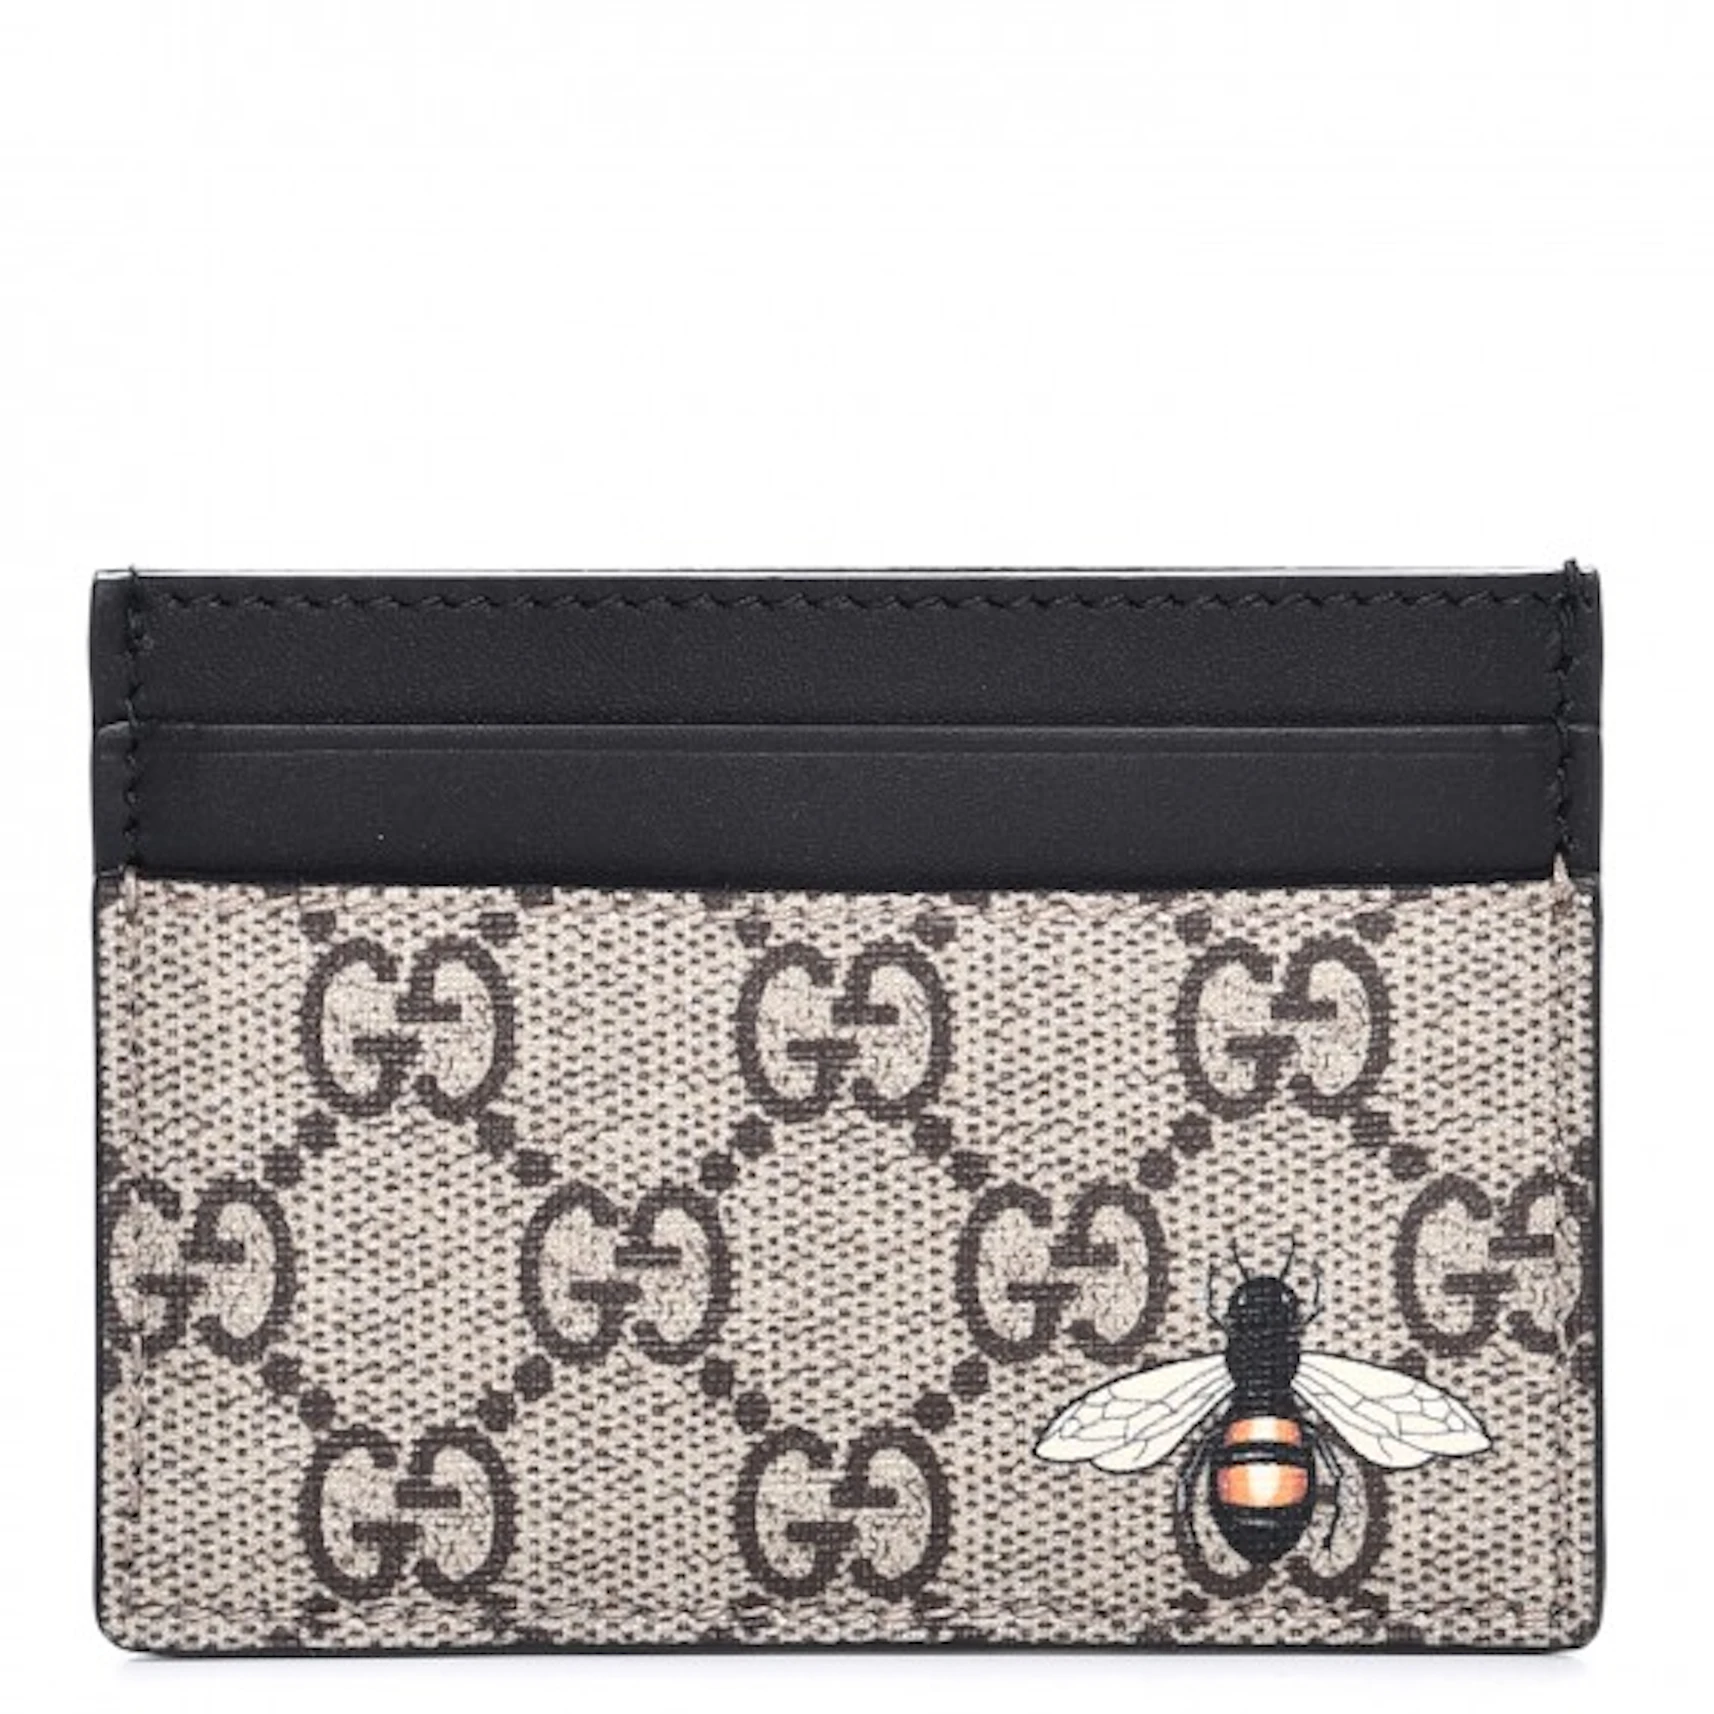 Gucci Card Case GG Supreme Bee Print Black/Beige in Canvas Leather - US